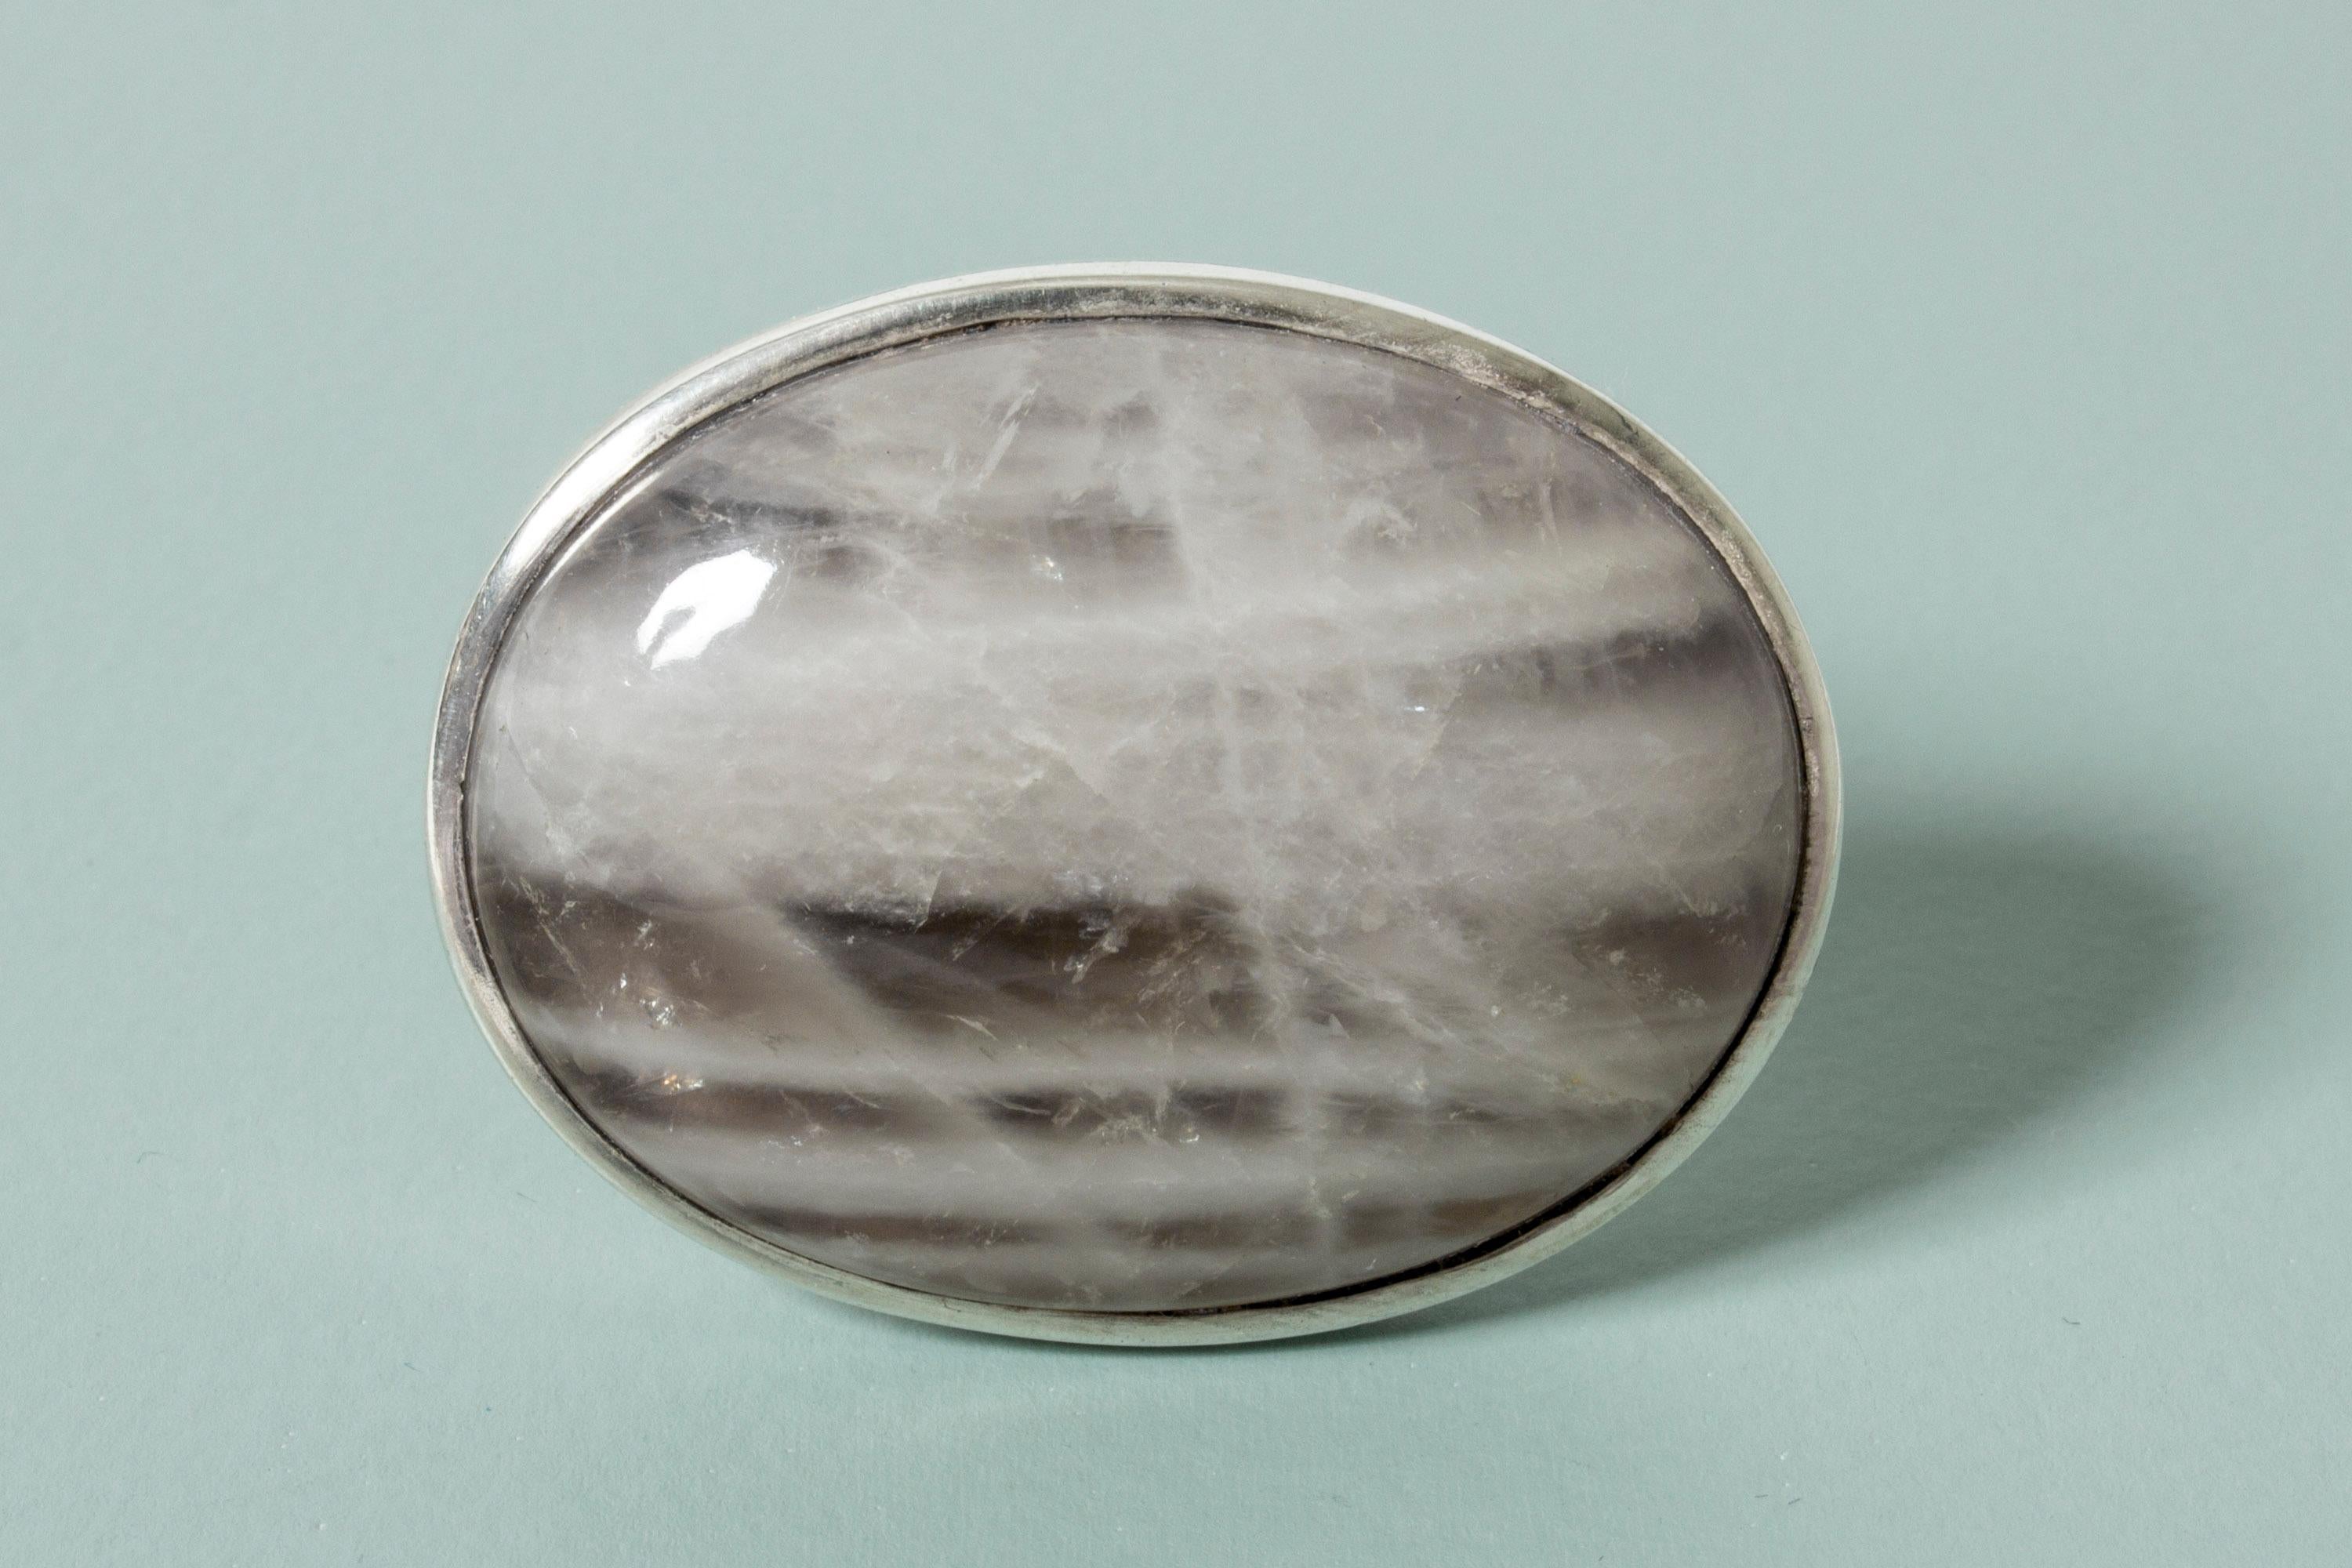 Women's or Men's Silver and Agate Ring from Kaunis Koru, Finland, 1974